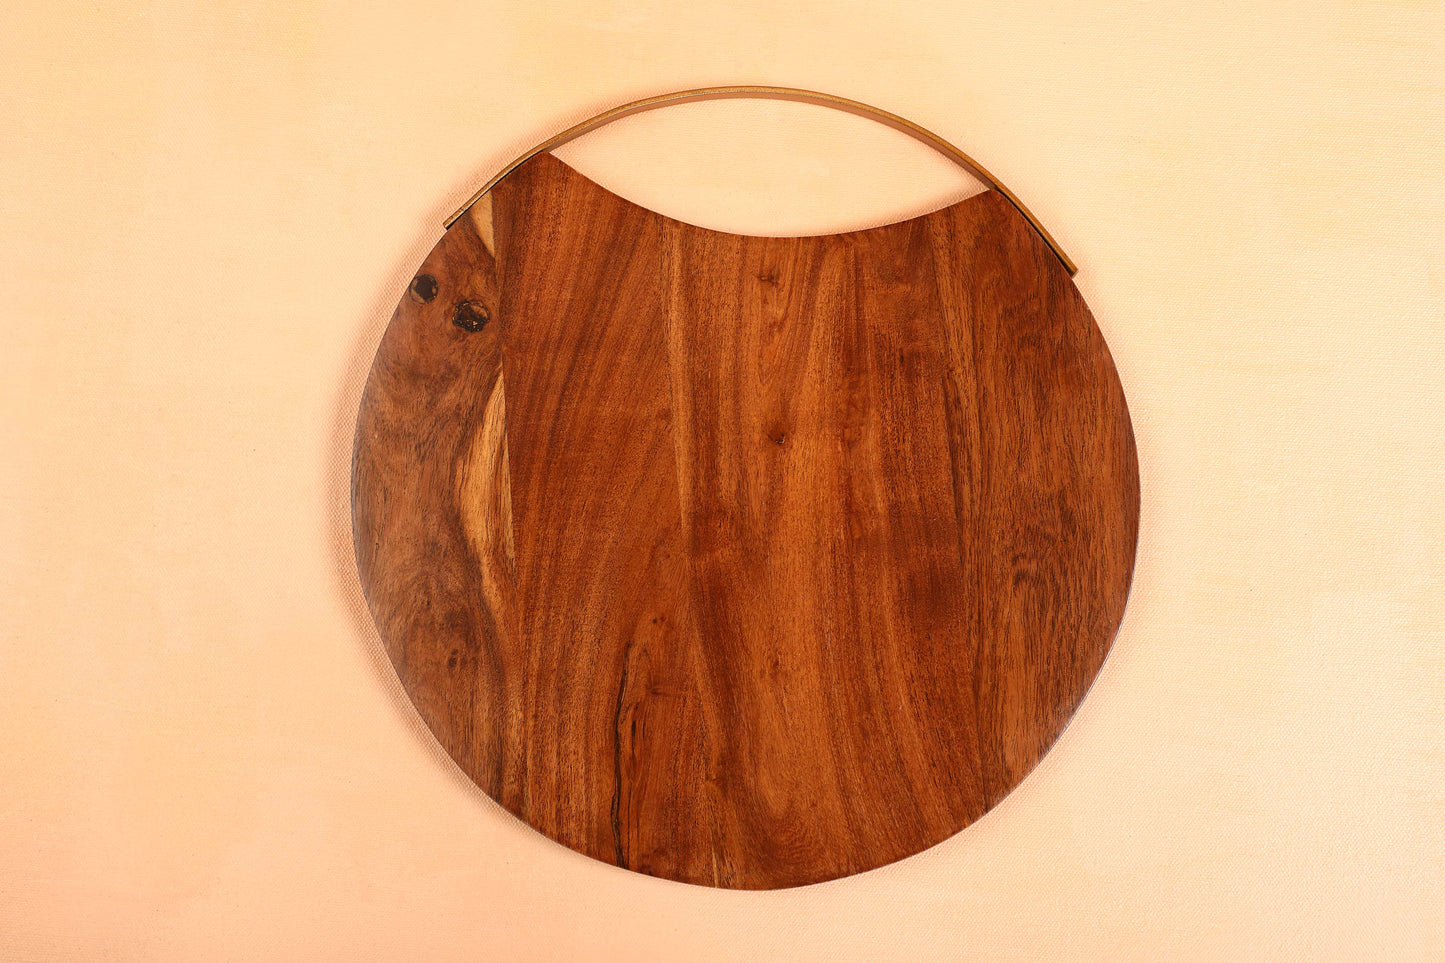 Handmade Wood Charcuterie Board - Round -  12 inches (Set of 2) by The Artisen